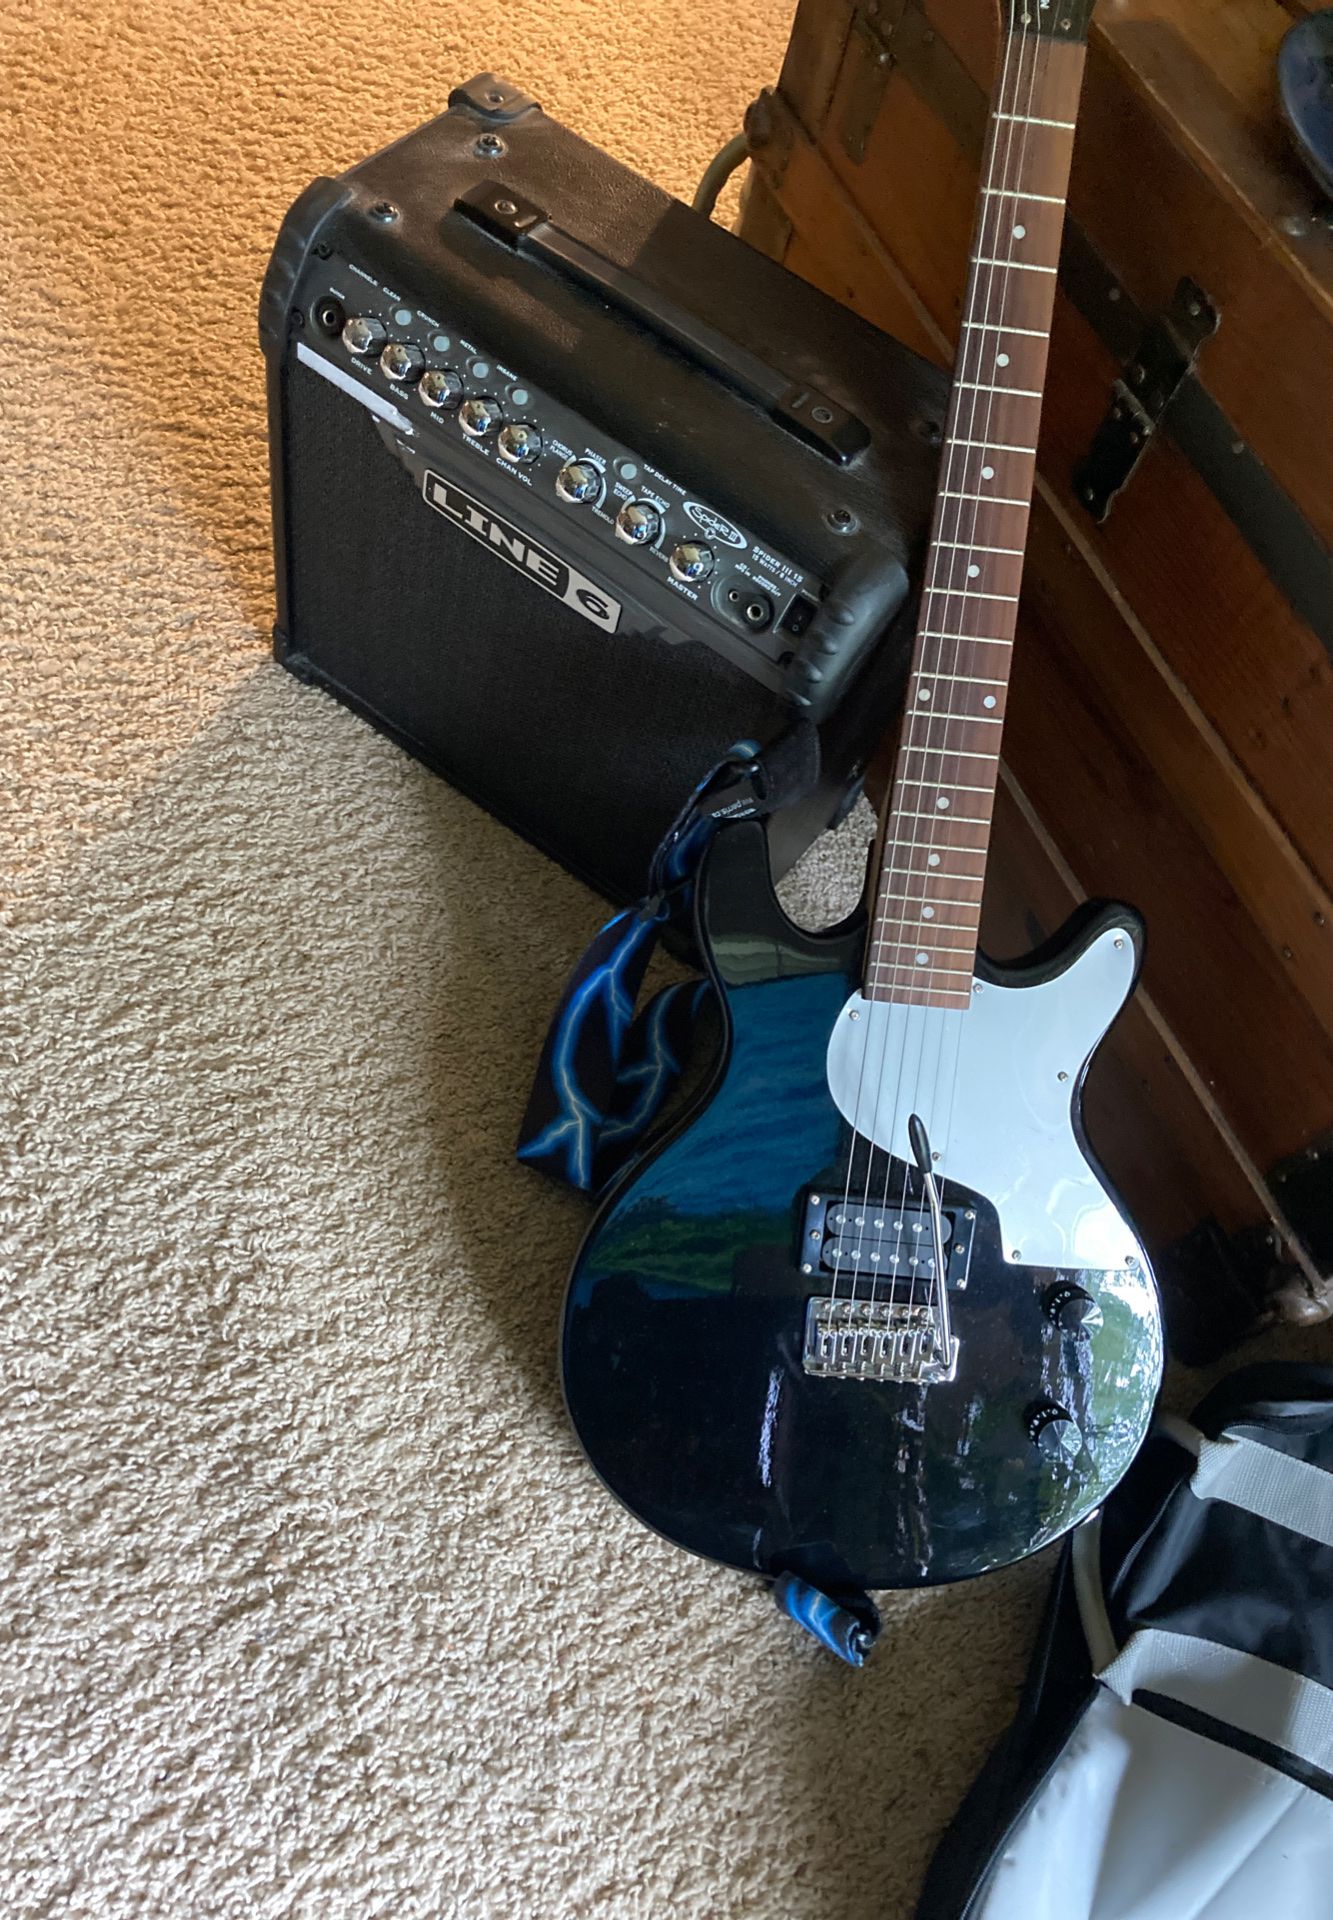 Beginner guitar and amp! Great condition